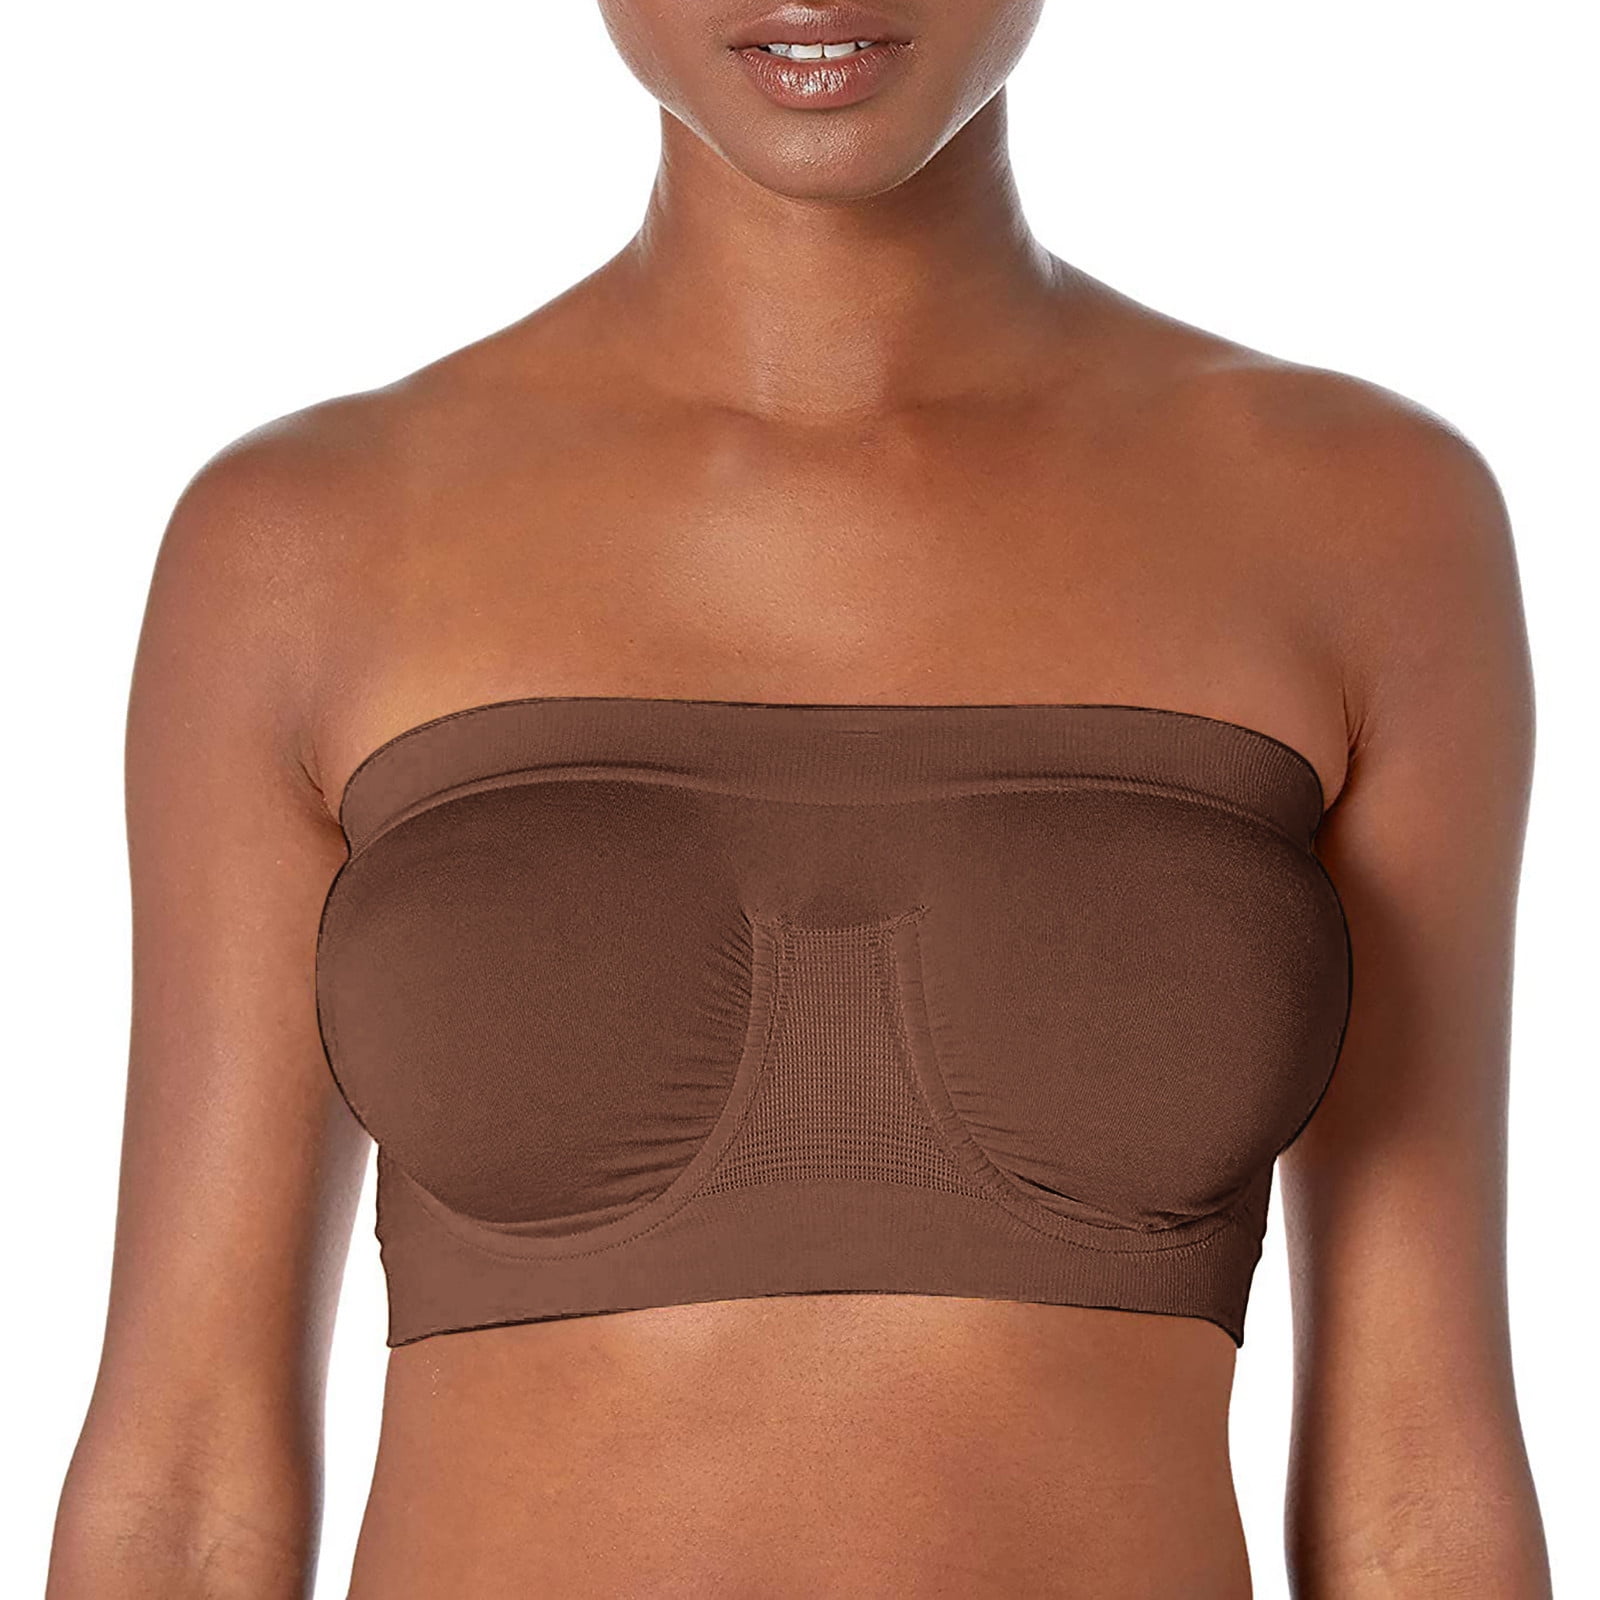 FunAloe Strapless Bras for Small Breasts Comfort Bras Plus Size